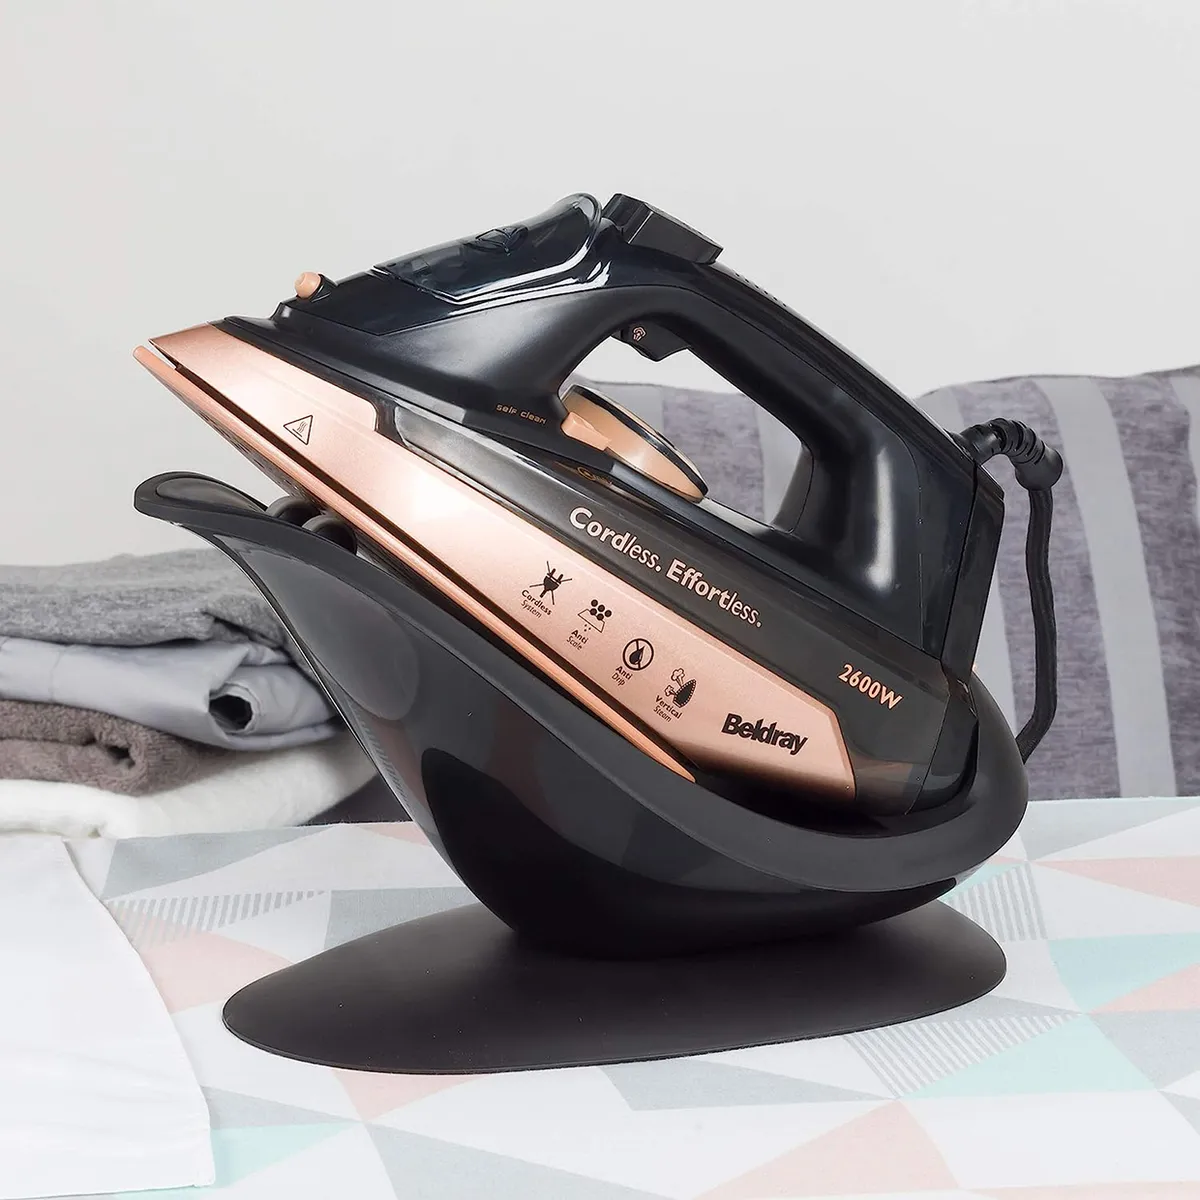 Beldray cordless iron for quilting